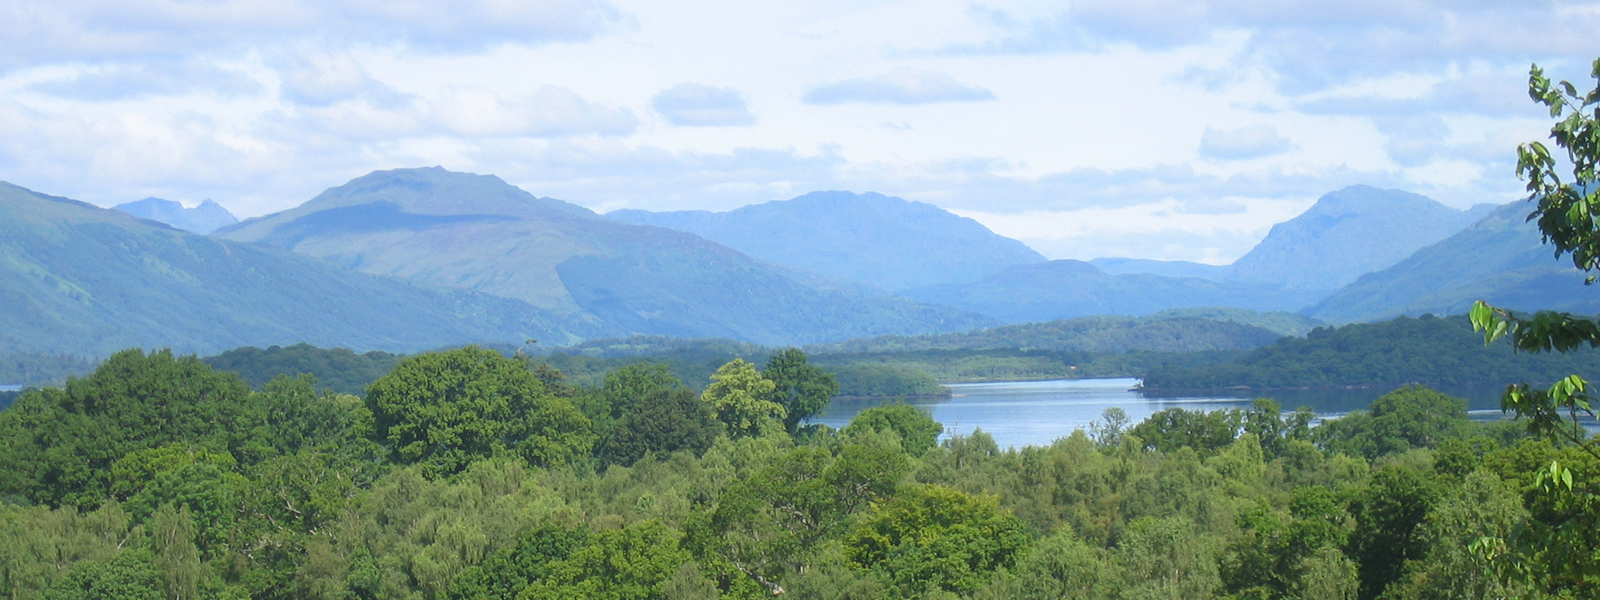 Ross Priory Golf Course, with views of Loch Lomond. Photograph courtesy of R Cook, Club Member.